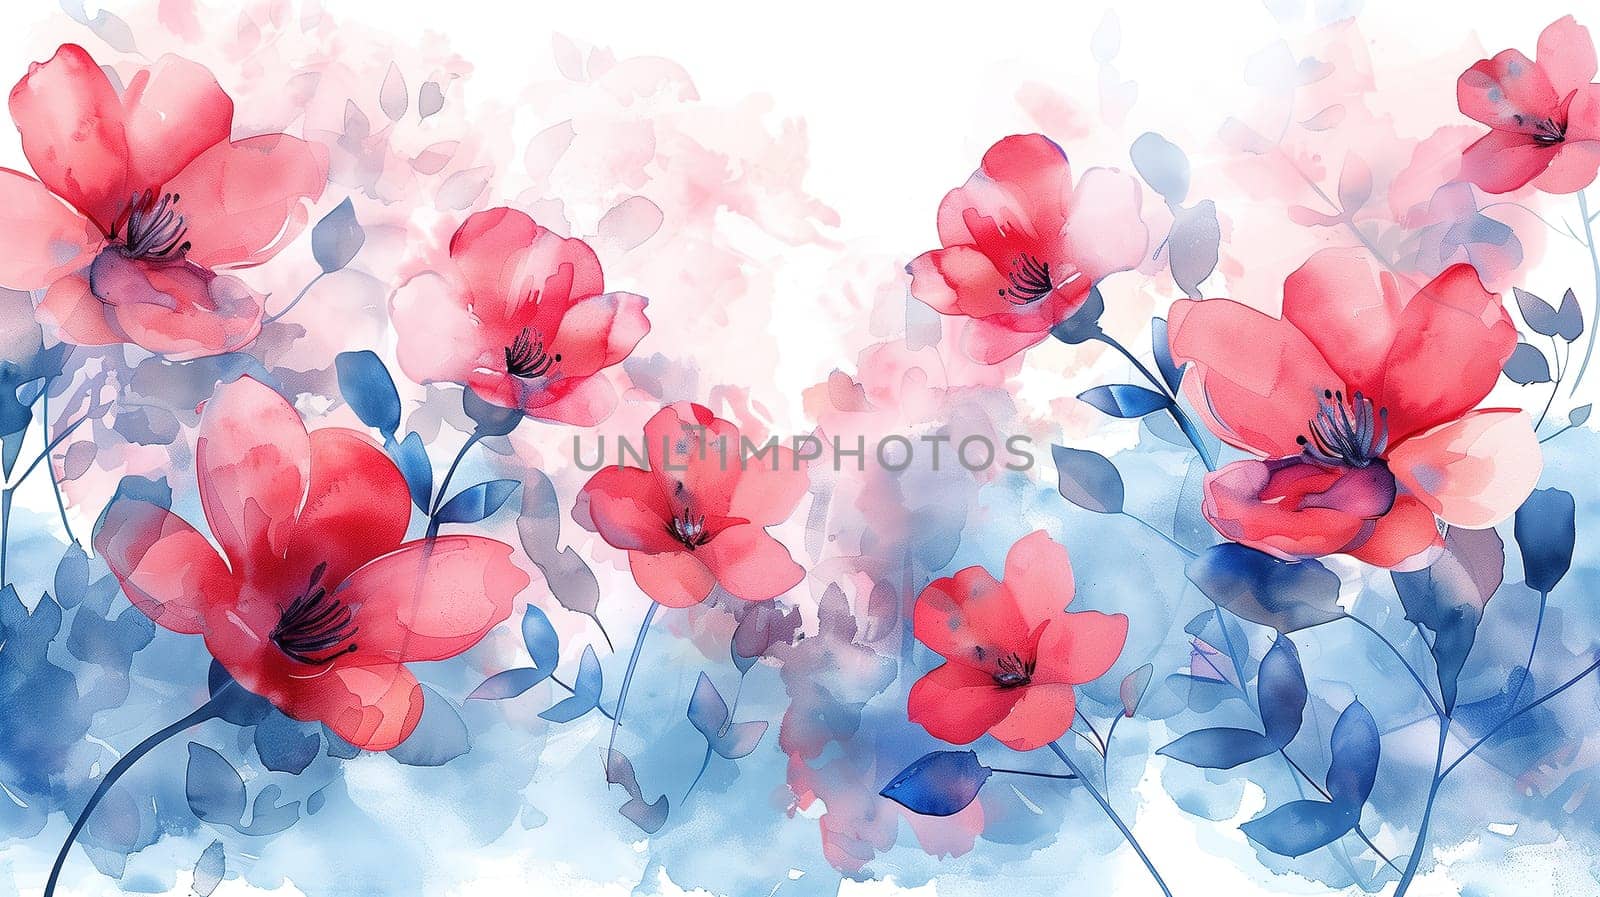 Red Flowers Painting on White Background by TRMK